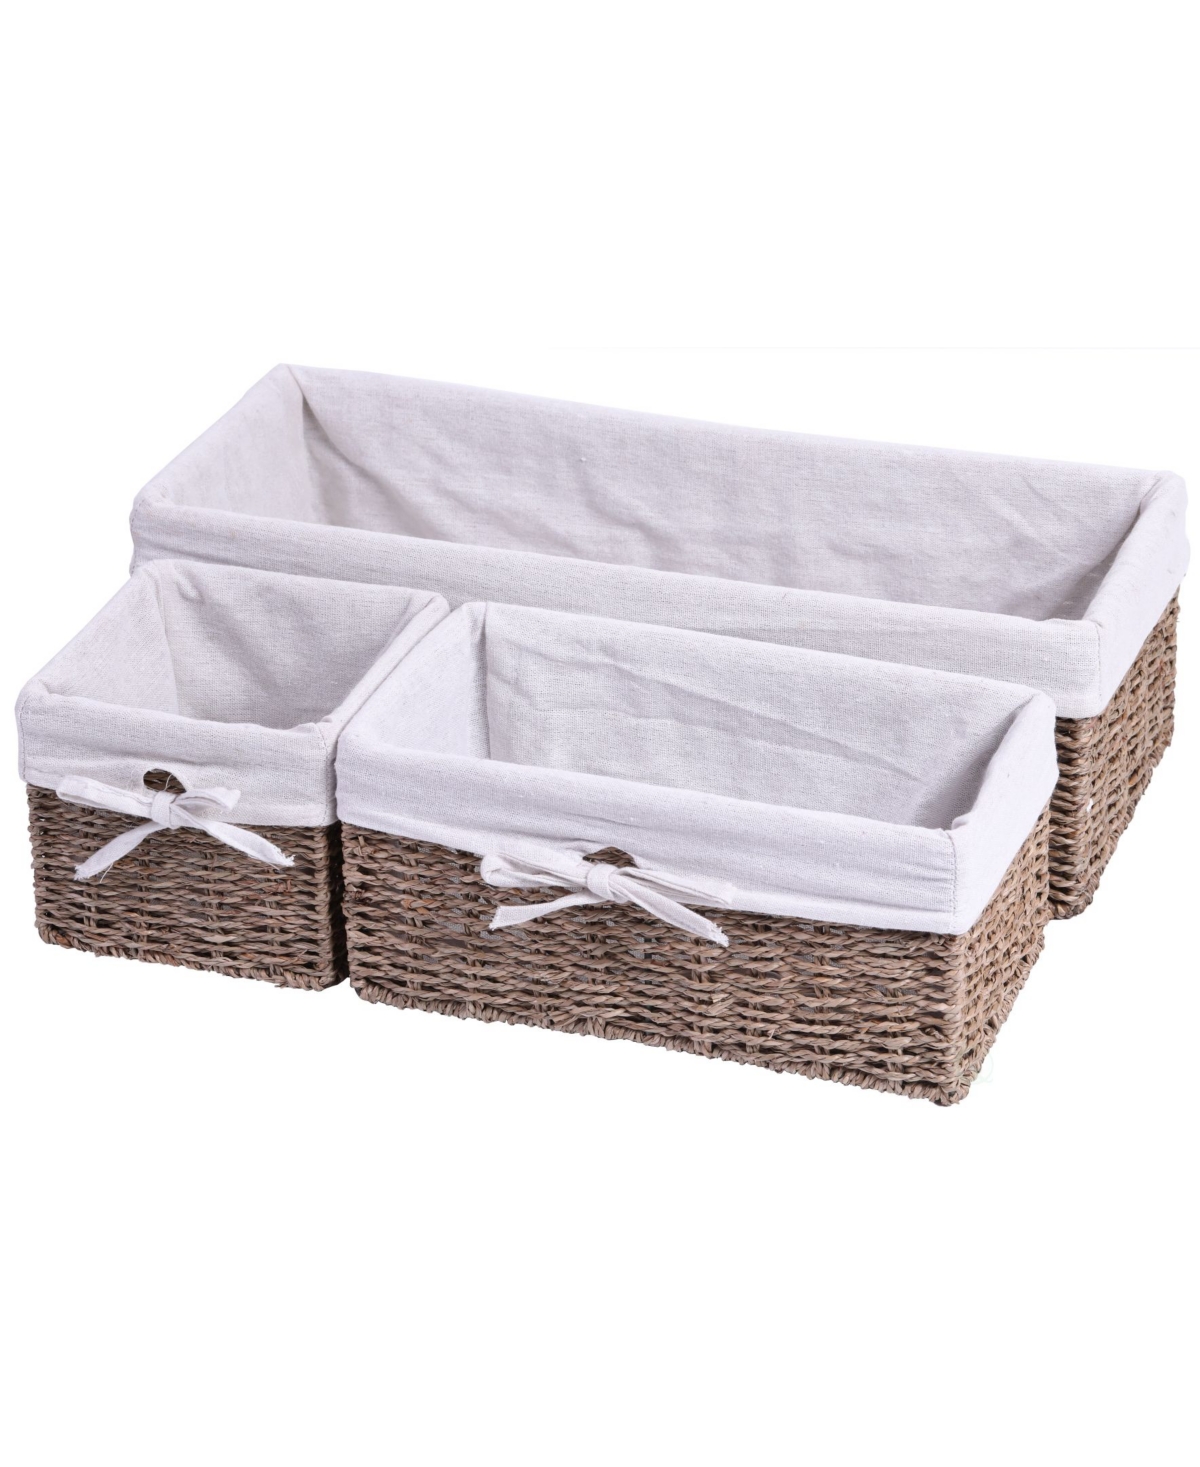 Seagrass Shelf Storage Baskets with Lining, Set of 3 - Brown